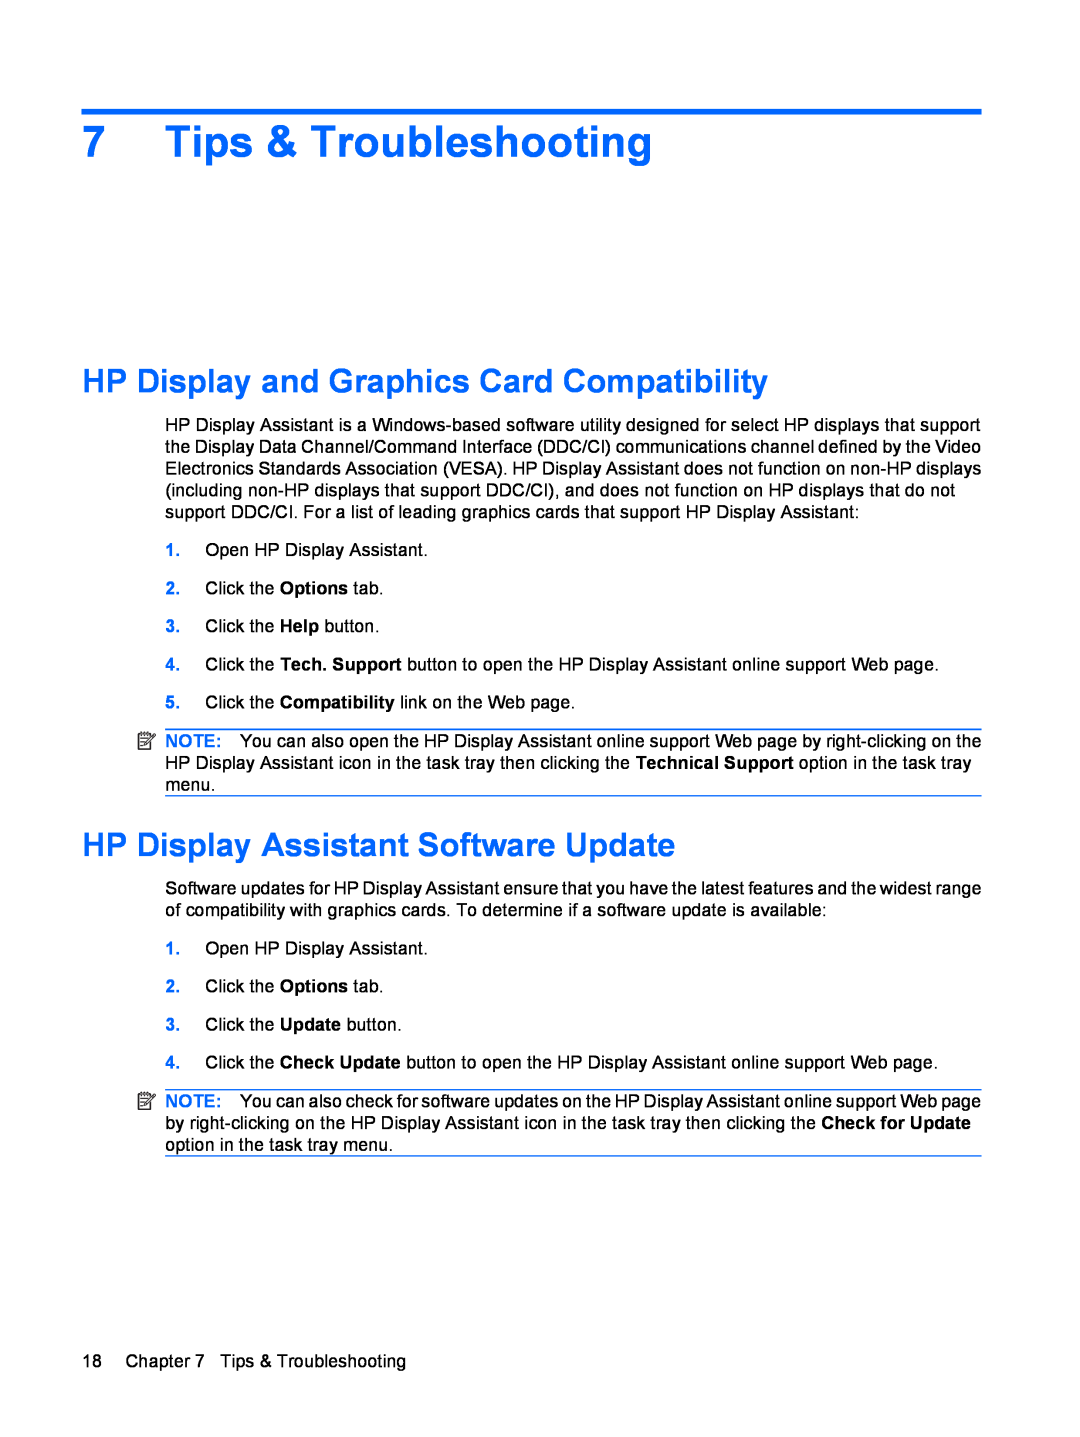 HP L1950 19-inch Tips & Troubleshooting, HP Display and Graphics Card Compatibility, HP Display Assistant Software Update 